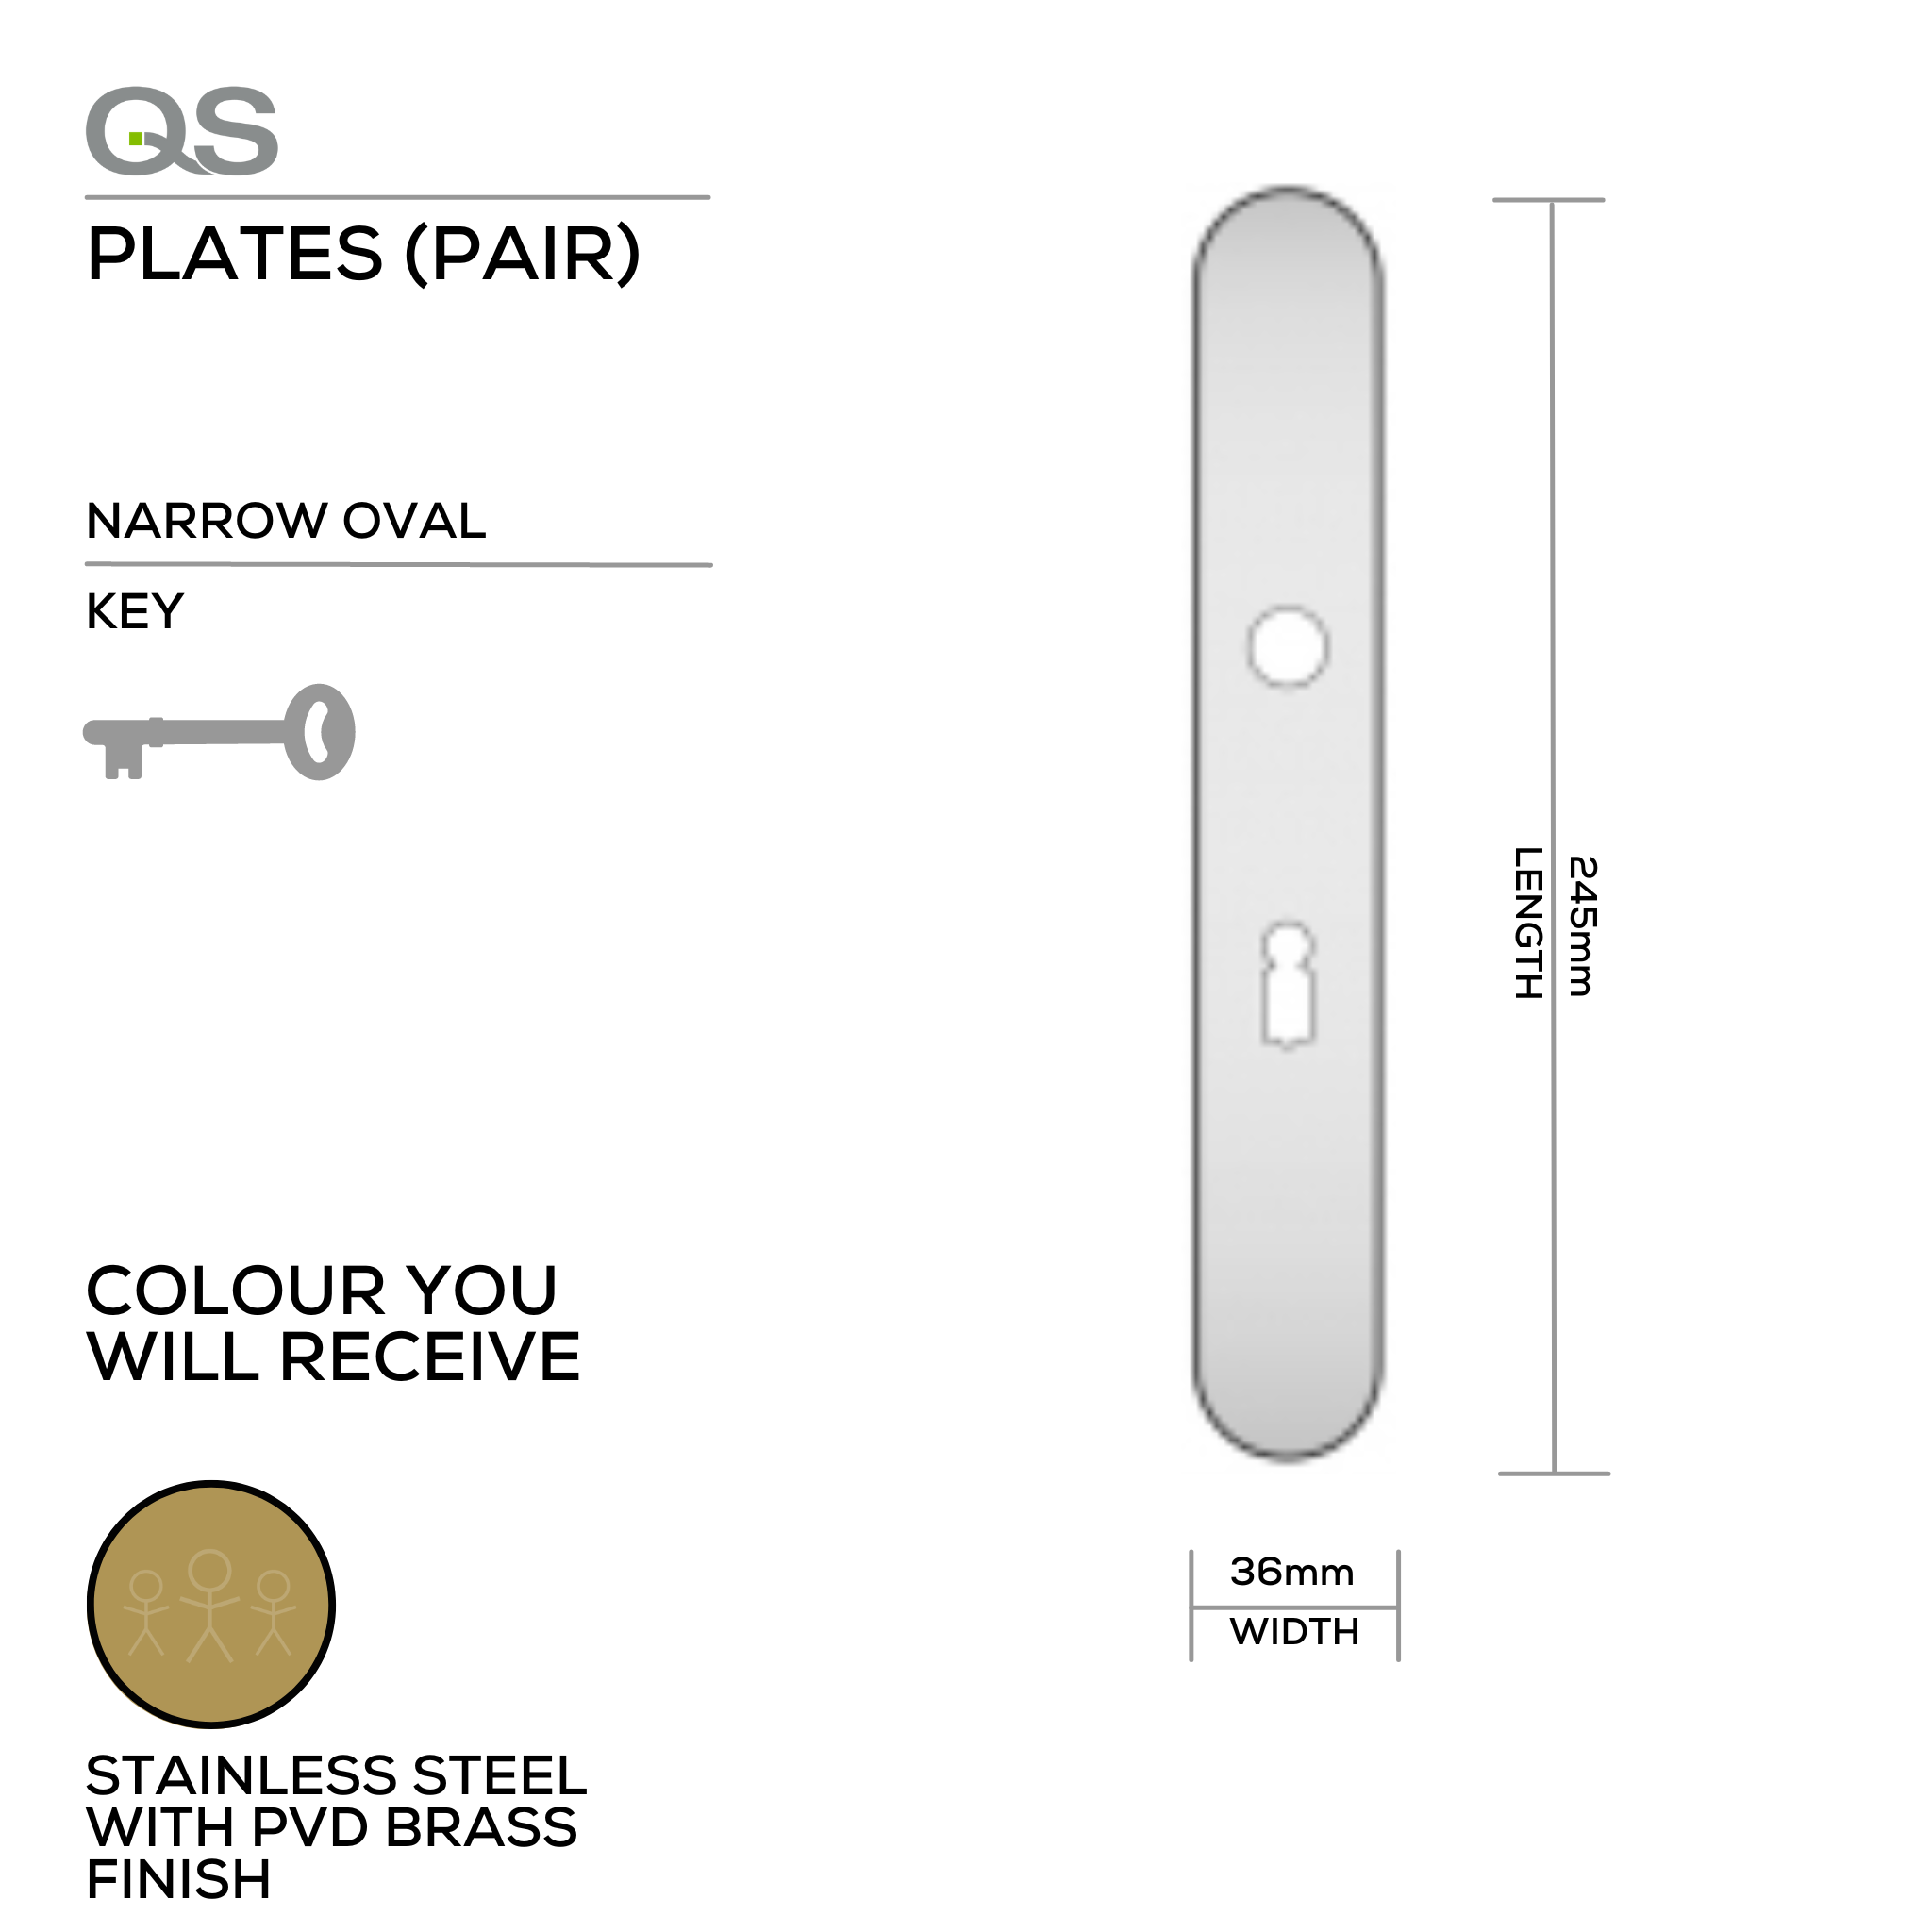 QS4483 PVD KH, Plate, Keyhole, Narrow Oval, 65mm Centres, 245mm (l) x 36mm (w), Supplied without QS Handle, PVD Brass, QS